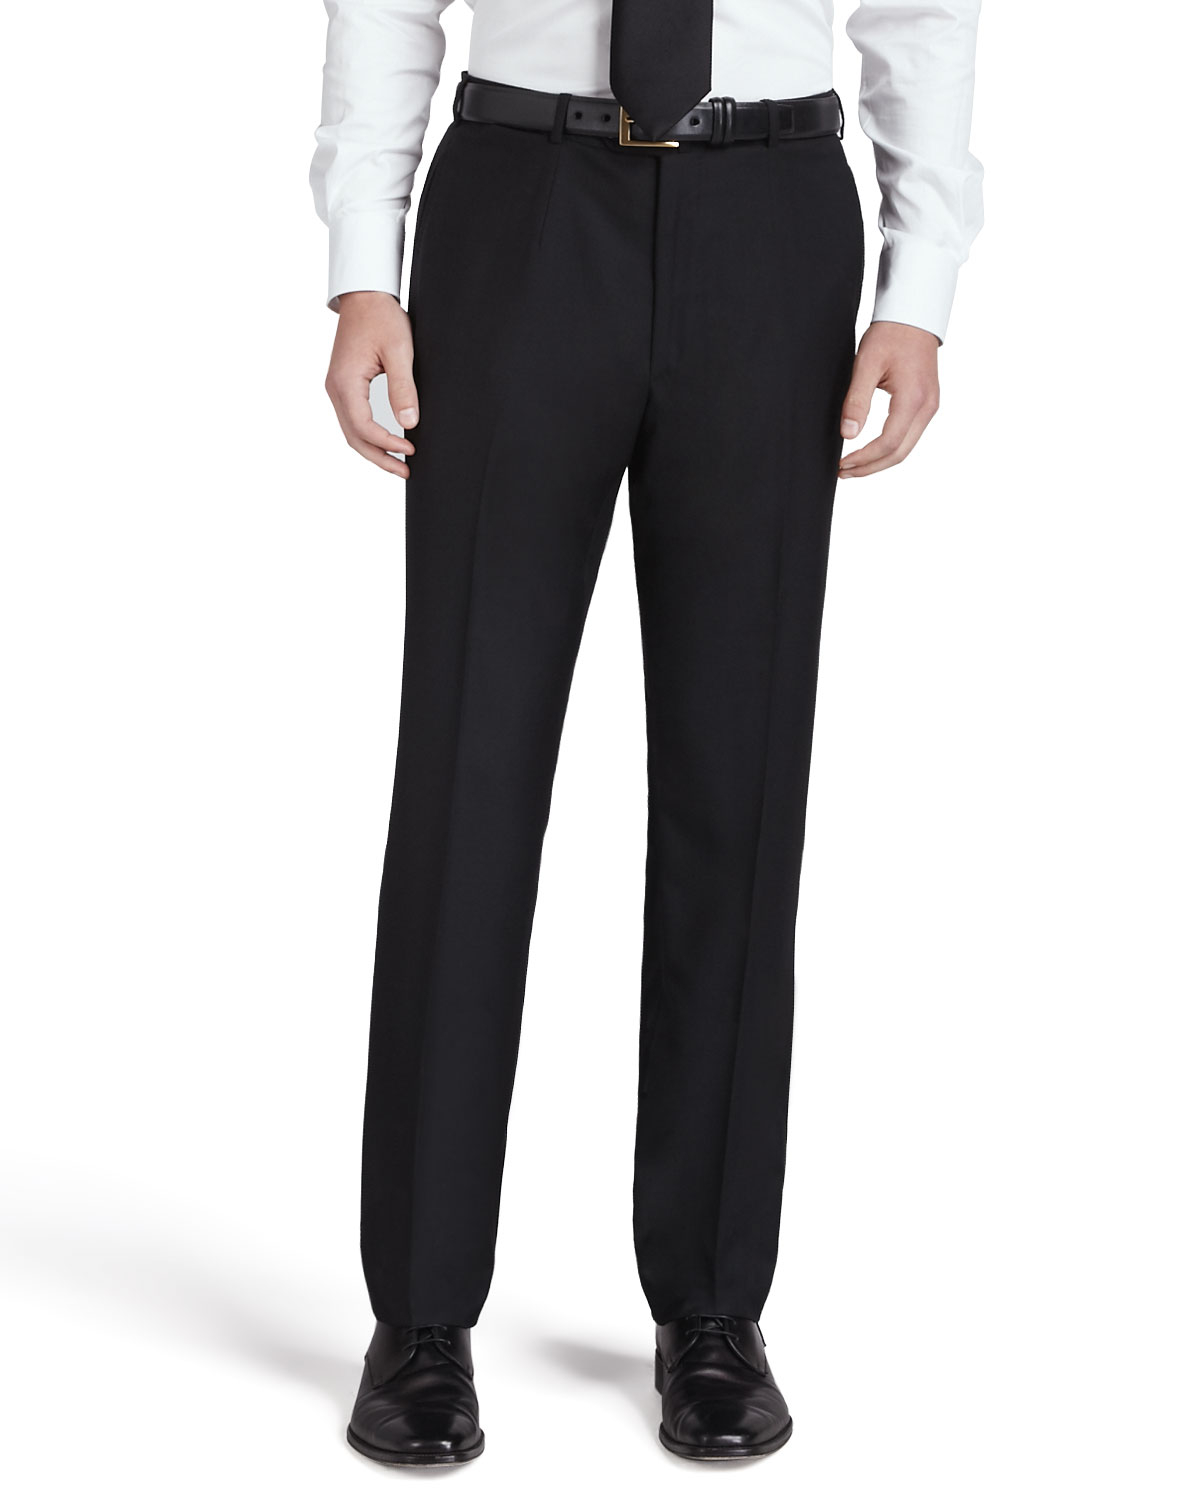 Lyst - Isaia Flat-front Trousers in Black for Men